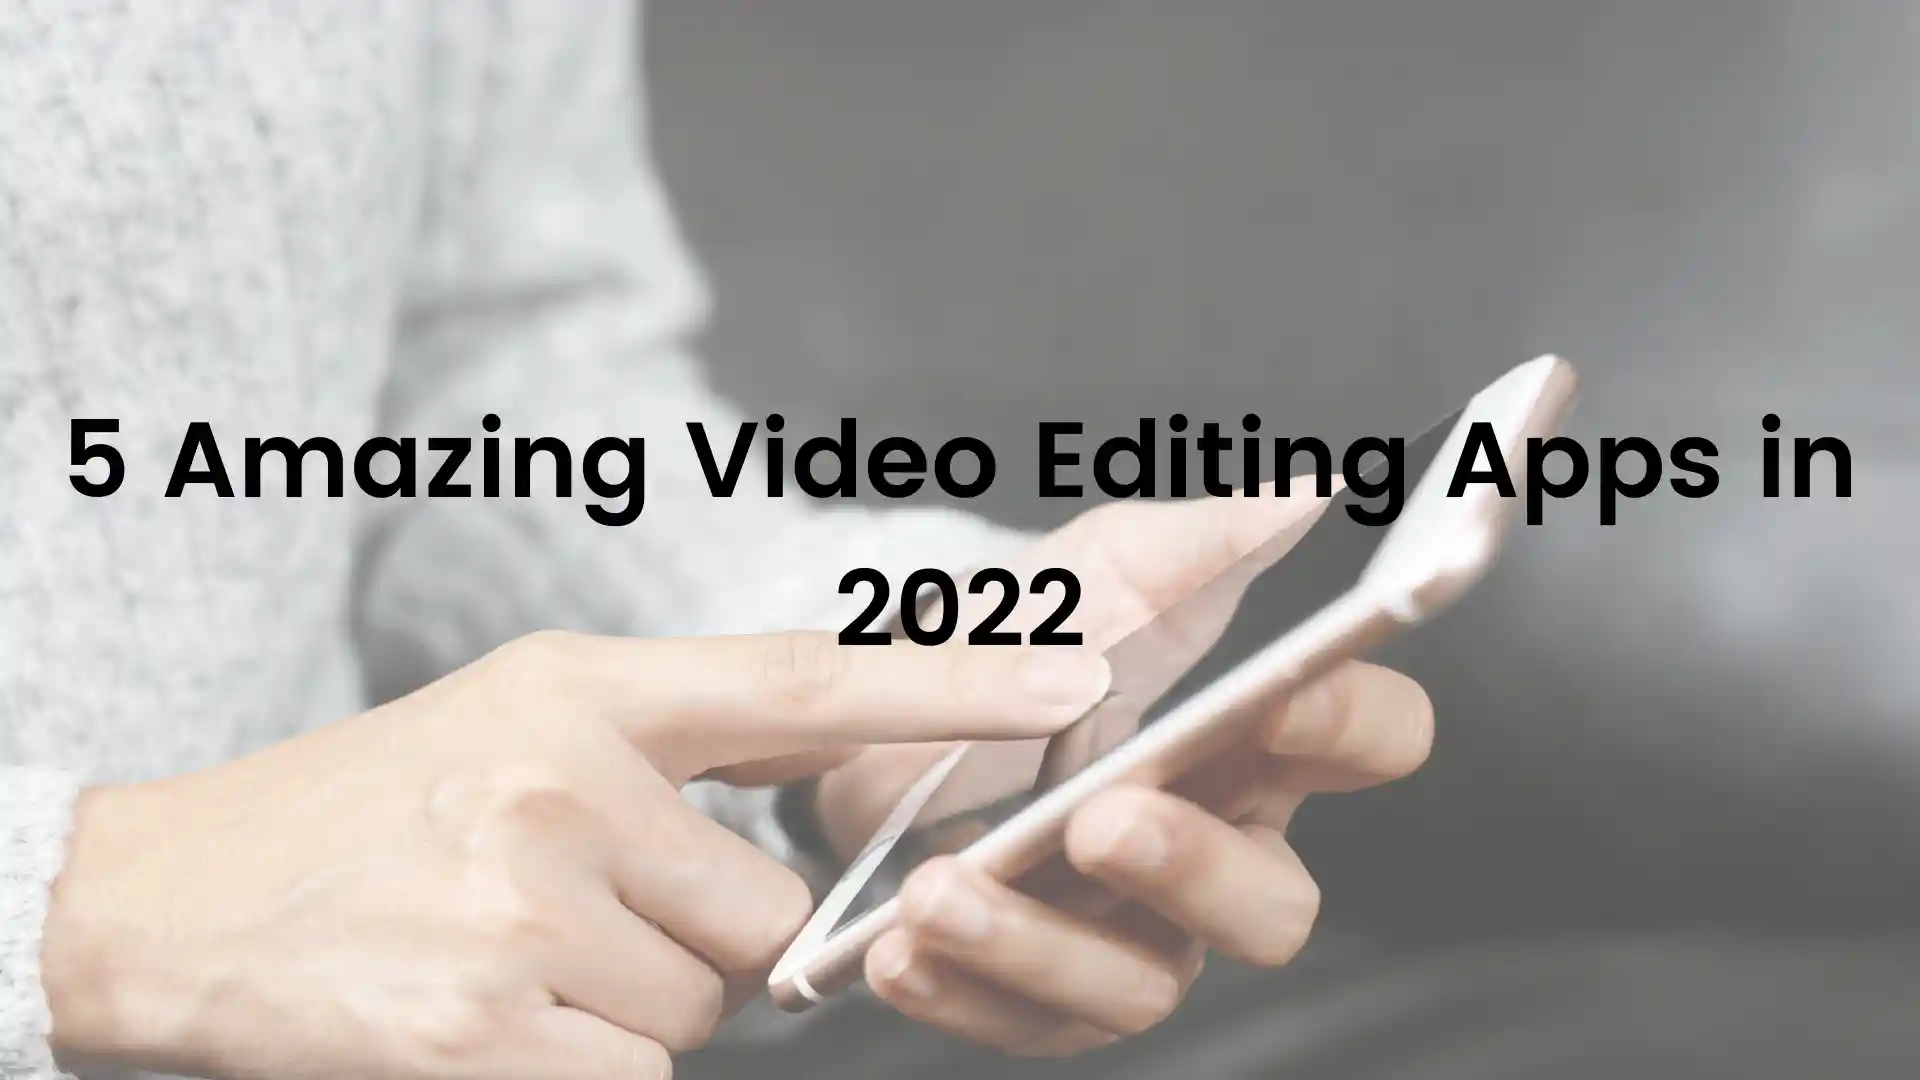 5 Amazing Video Editing Apps in 2022